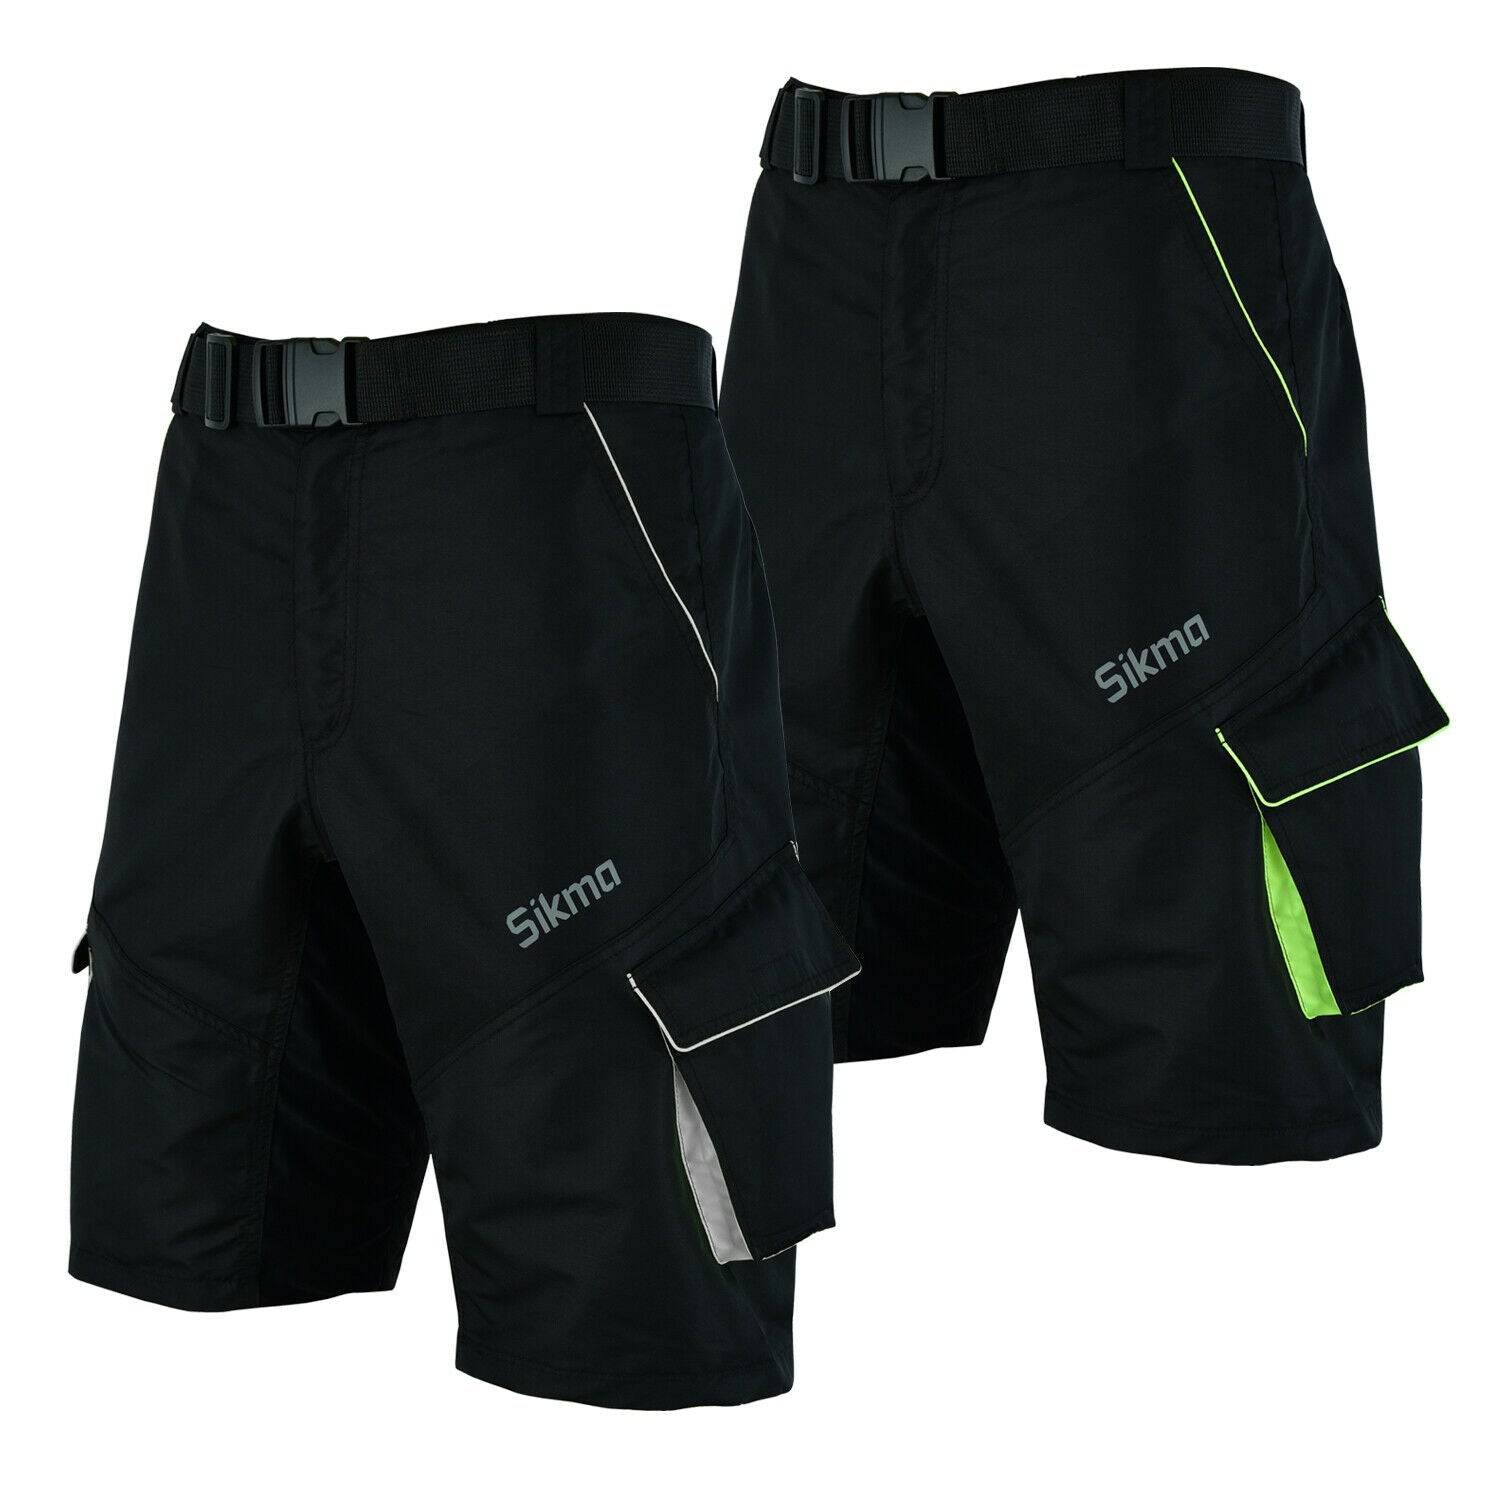 Baggy MTB Shorts with Padded Liner